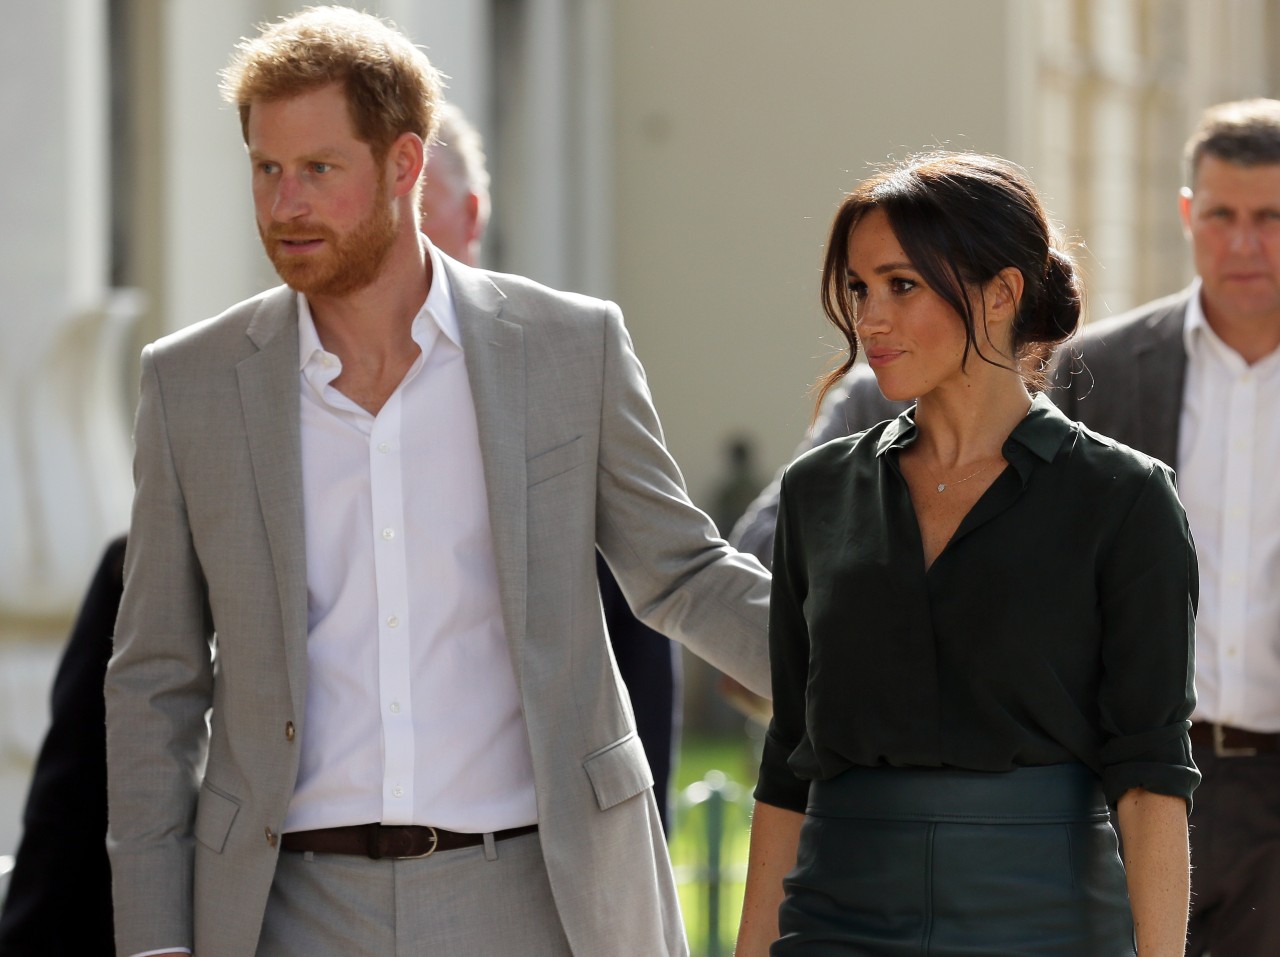 Royal Expert Calls Meghan Markle a ‘B****’ and ‘Difficult’: ‘People Say She’s a B**** Because She’s a B****’